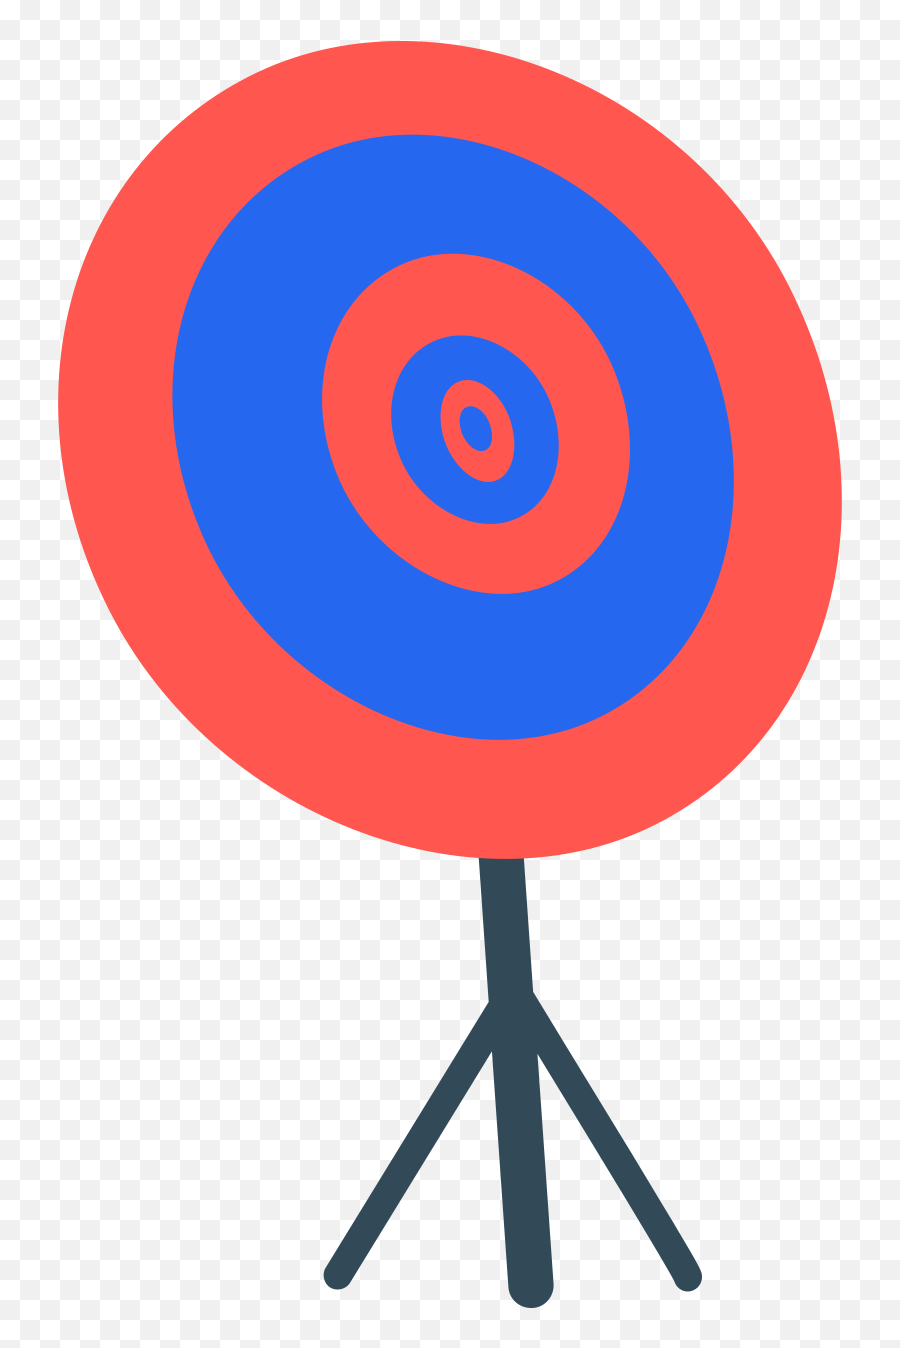 Style Target Vector Images In Png And Svg Icons8 Illustrations - Shooting Target,Graphic Design Icon Vector